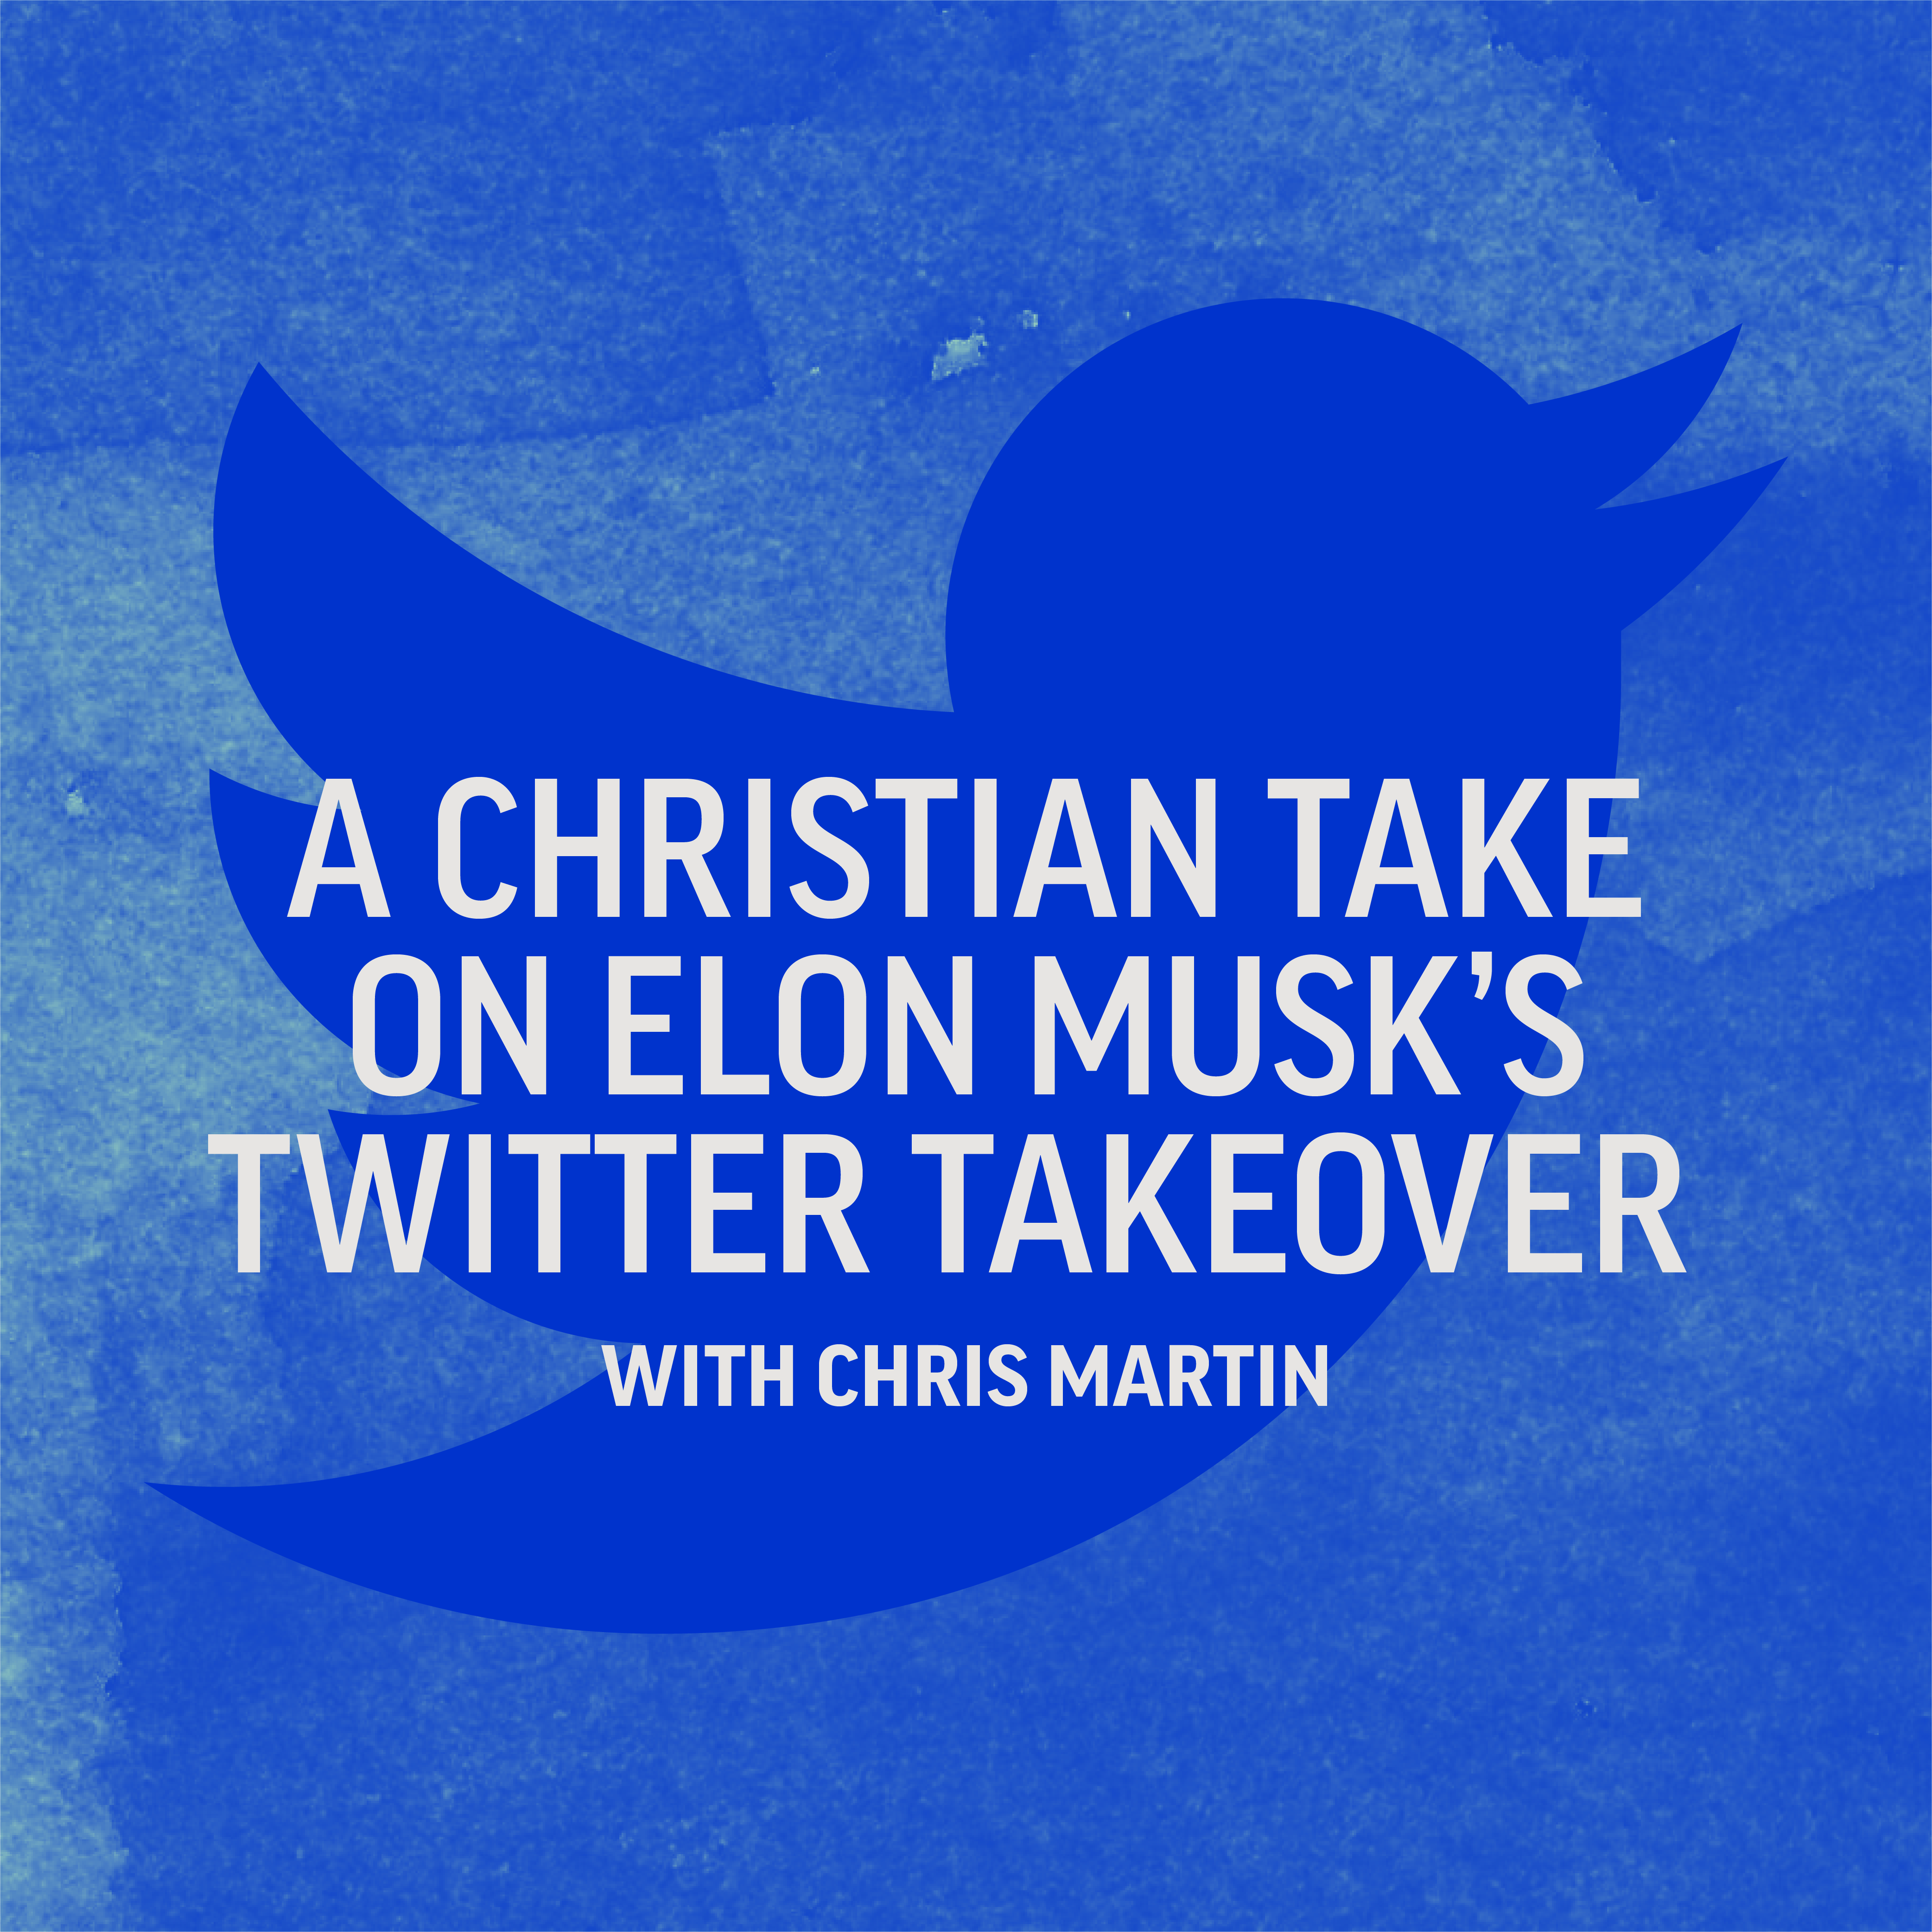 A Christian Take on Elon Musk's Twitter Takeover with Chris Martin